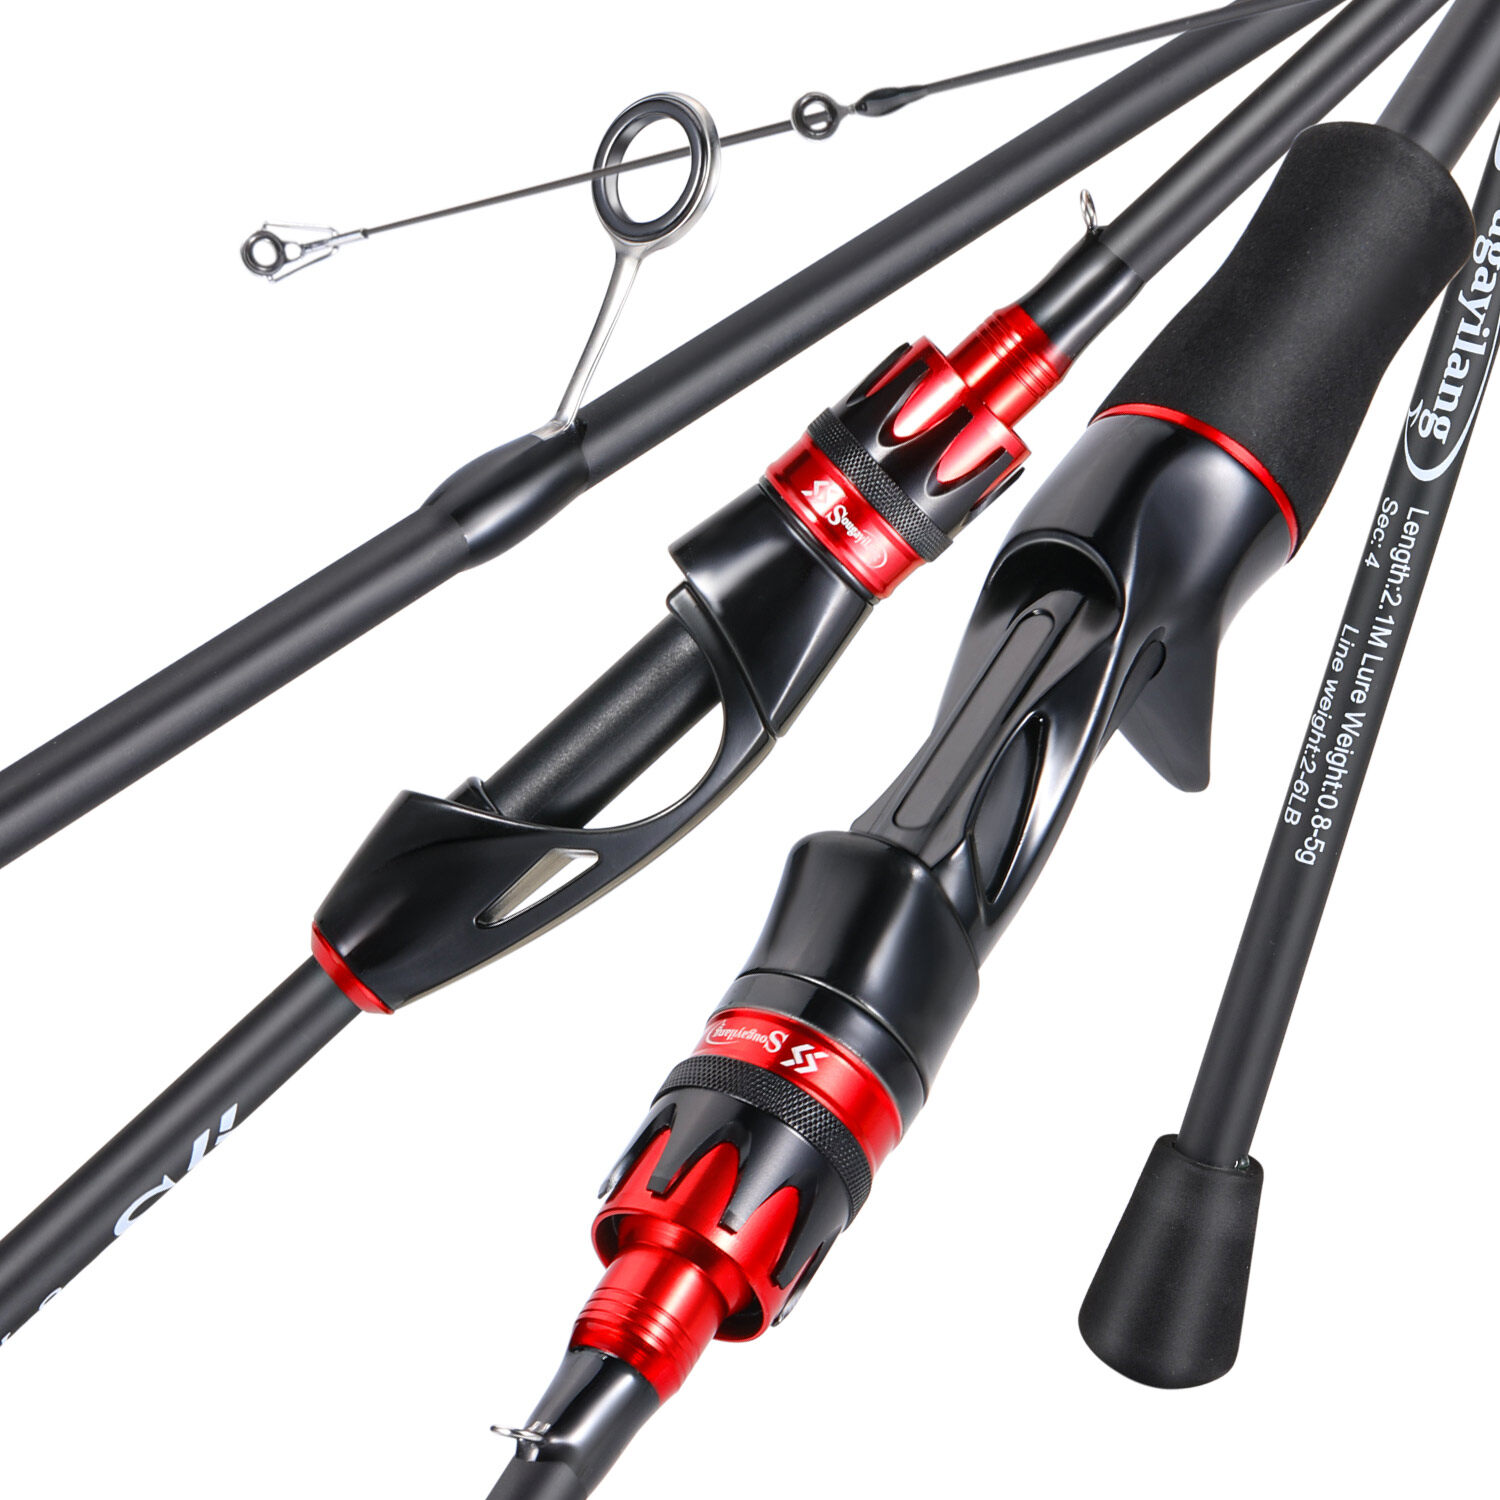 Fishing Rod for Freshwater and Saltwater Fishing 4-Section 2.1m / 2.4m  Spinning Rod Casting Rod High quality